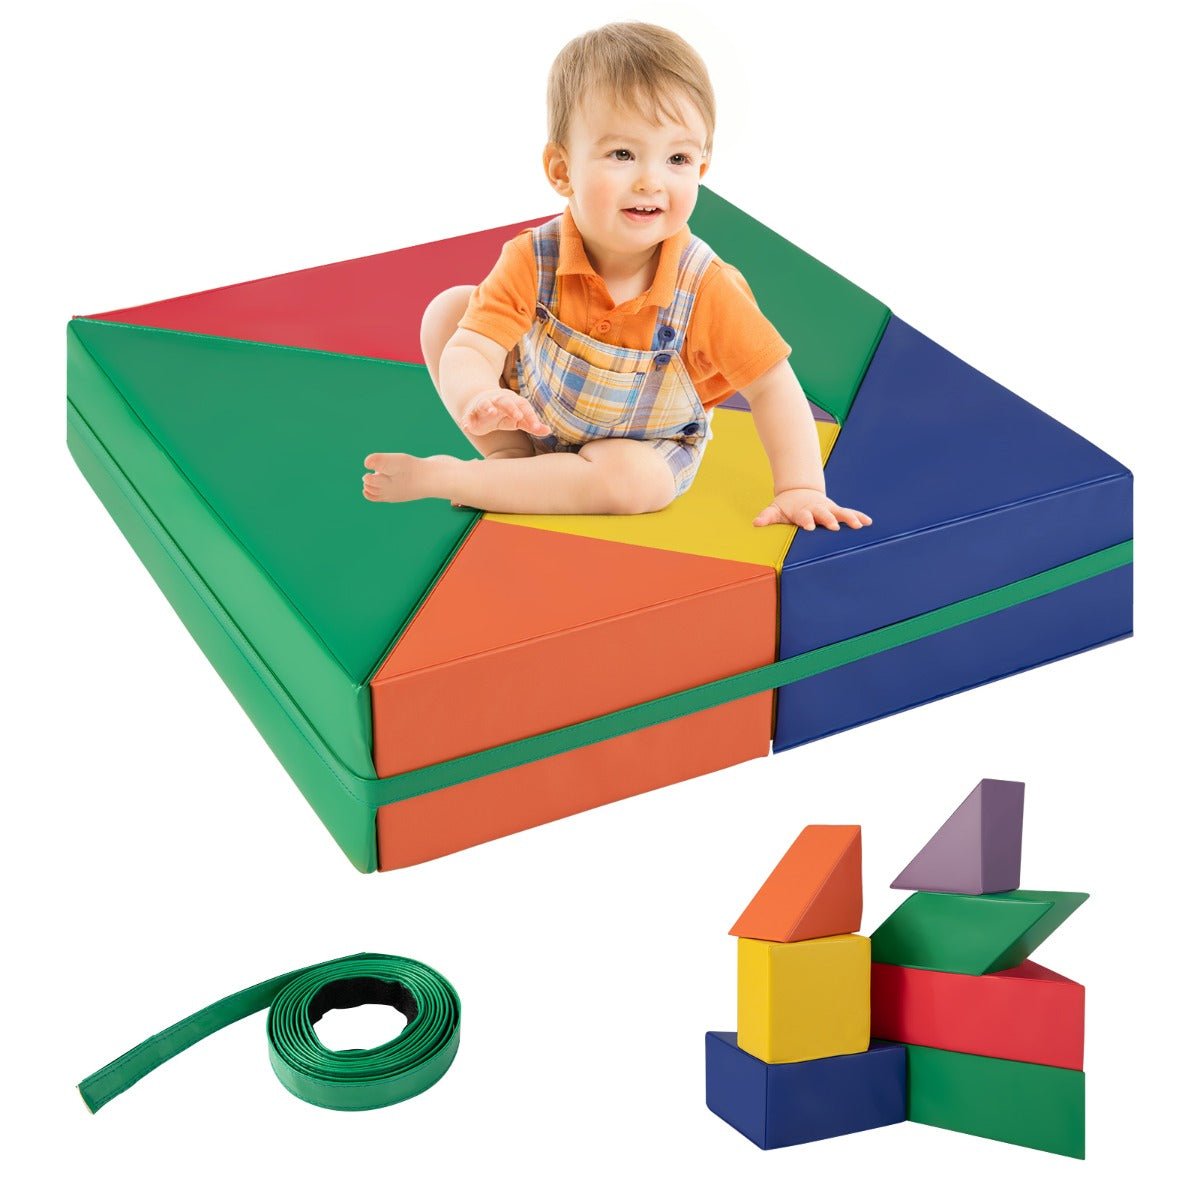 Explore Creative Learning with the 7-Piece Climb and Crawl Foam Play Set